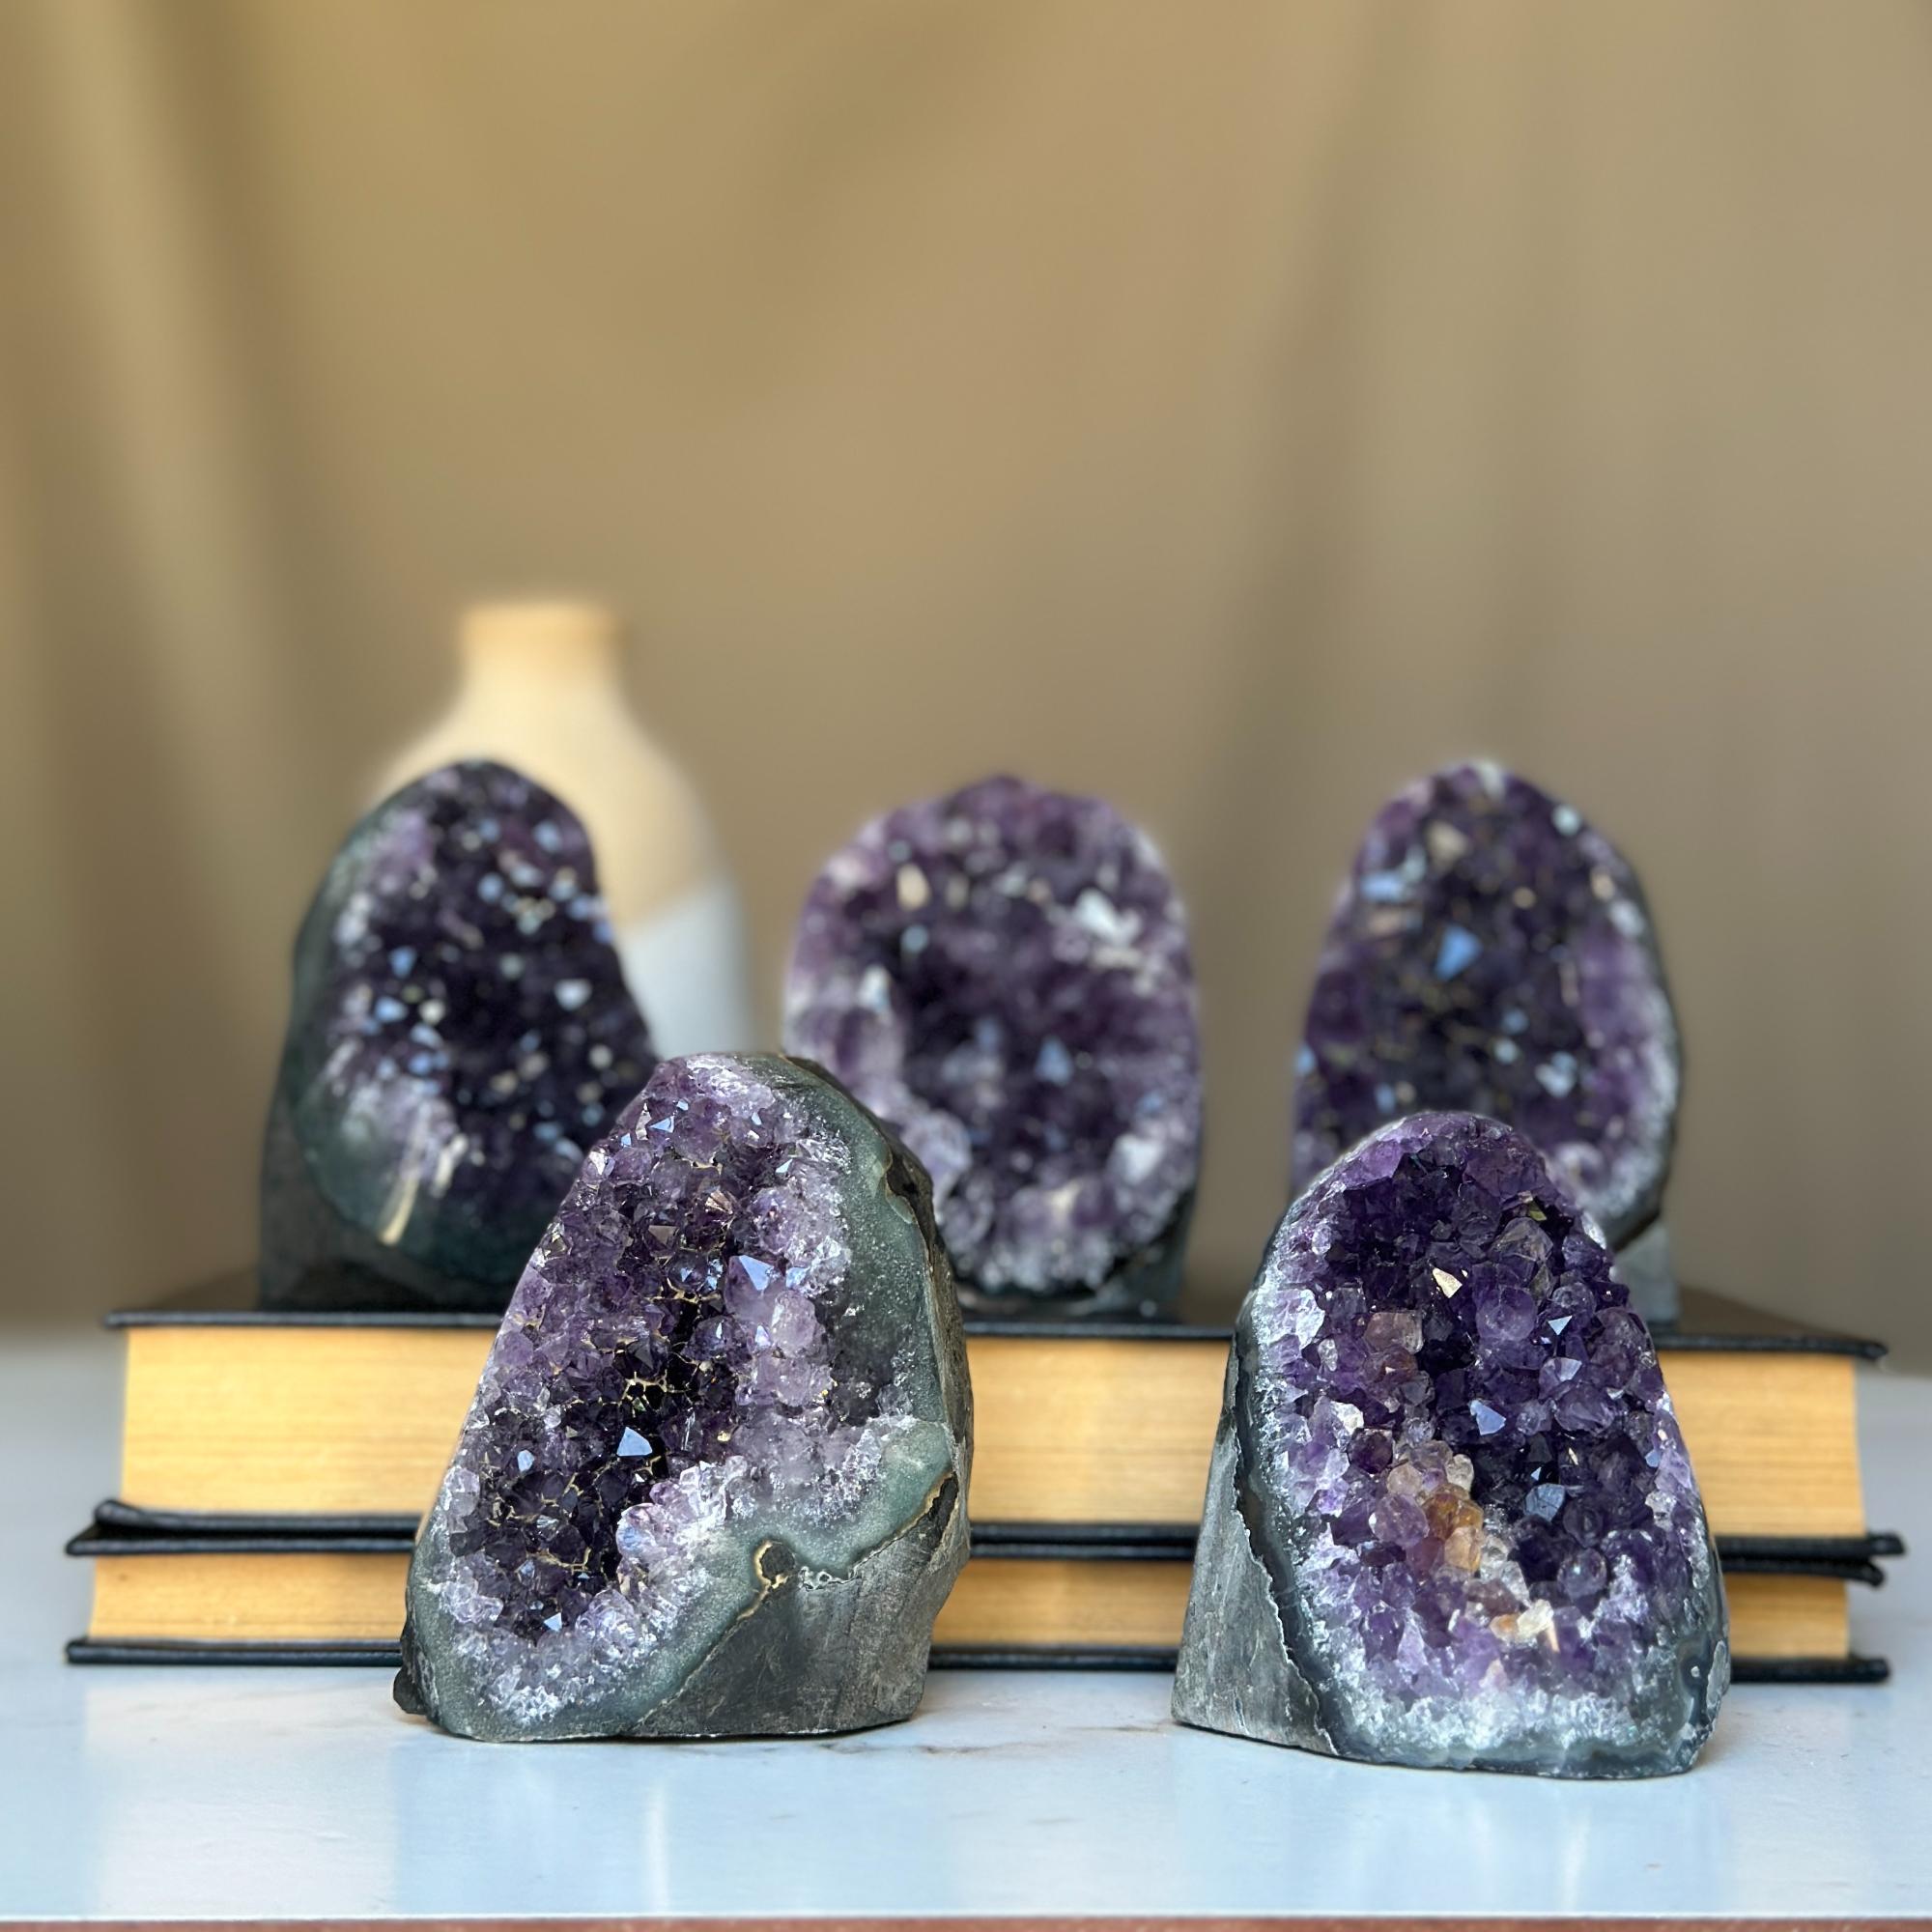 Cute Mini Amethysts SET (5 pieces), small crystal geodes to decor home